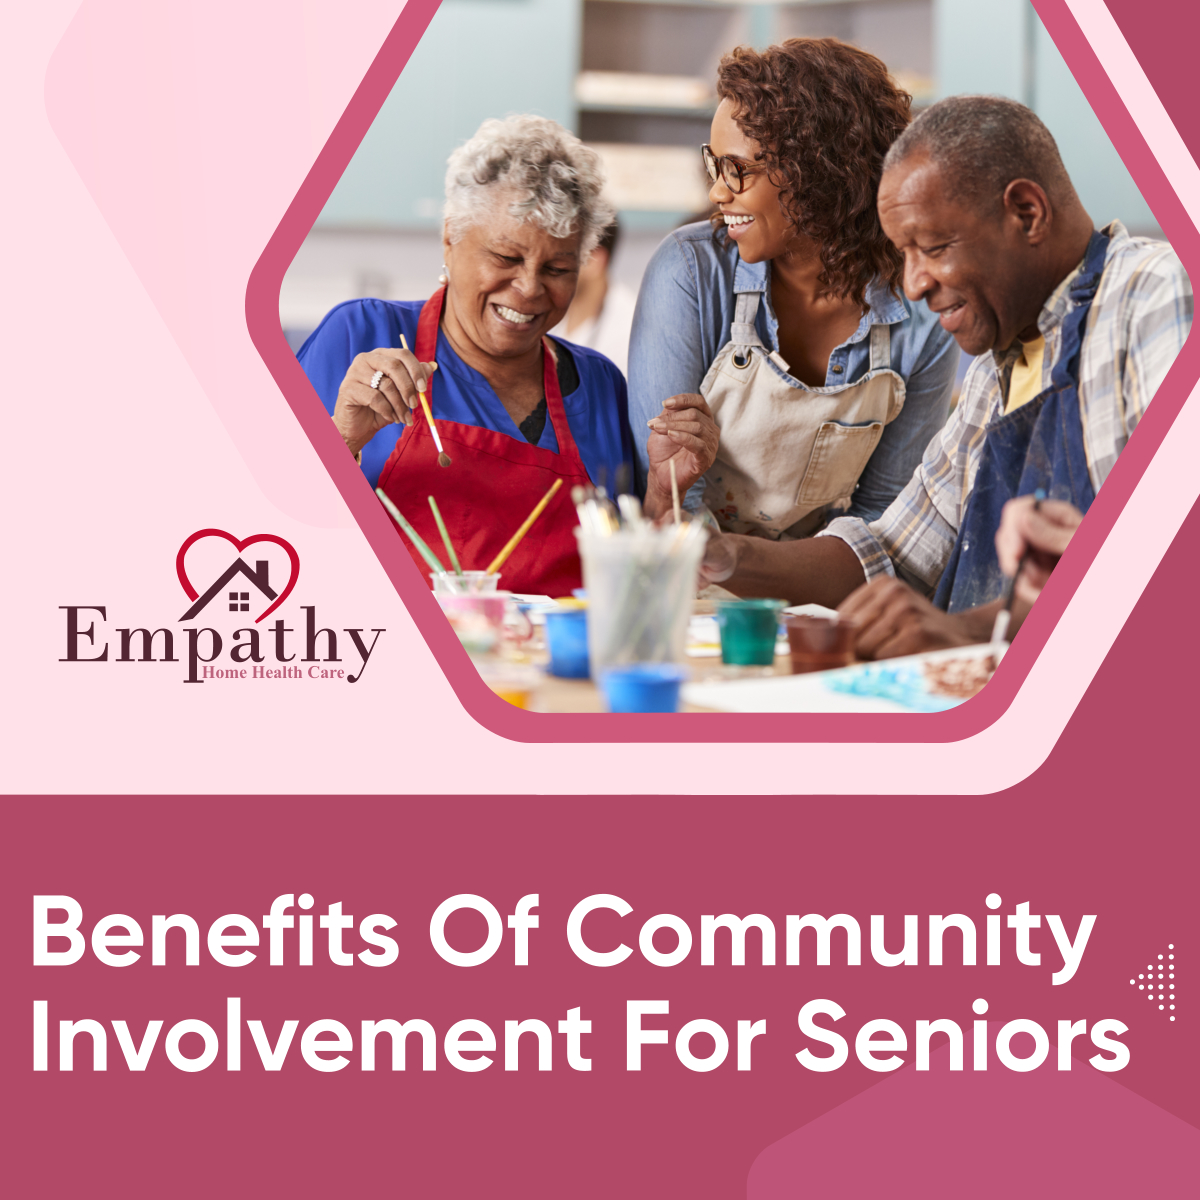 Community involvement or participation in community initiatives can provide seniors with many health benefits. 

Read more: facebook.com/empathyhhc/pos…

#PhiladelphiaPA #CommunityInvolvement #HomeHealthCare